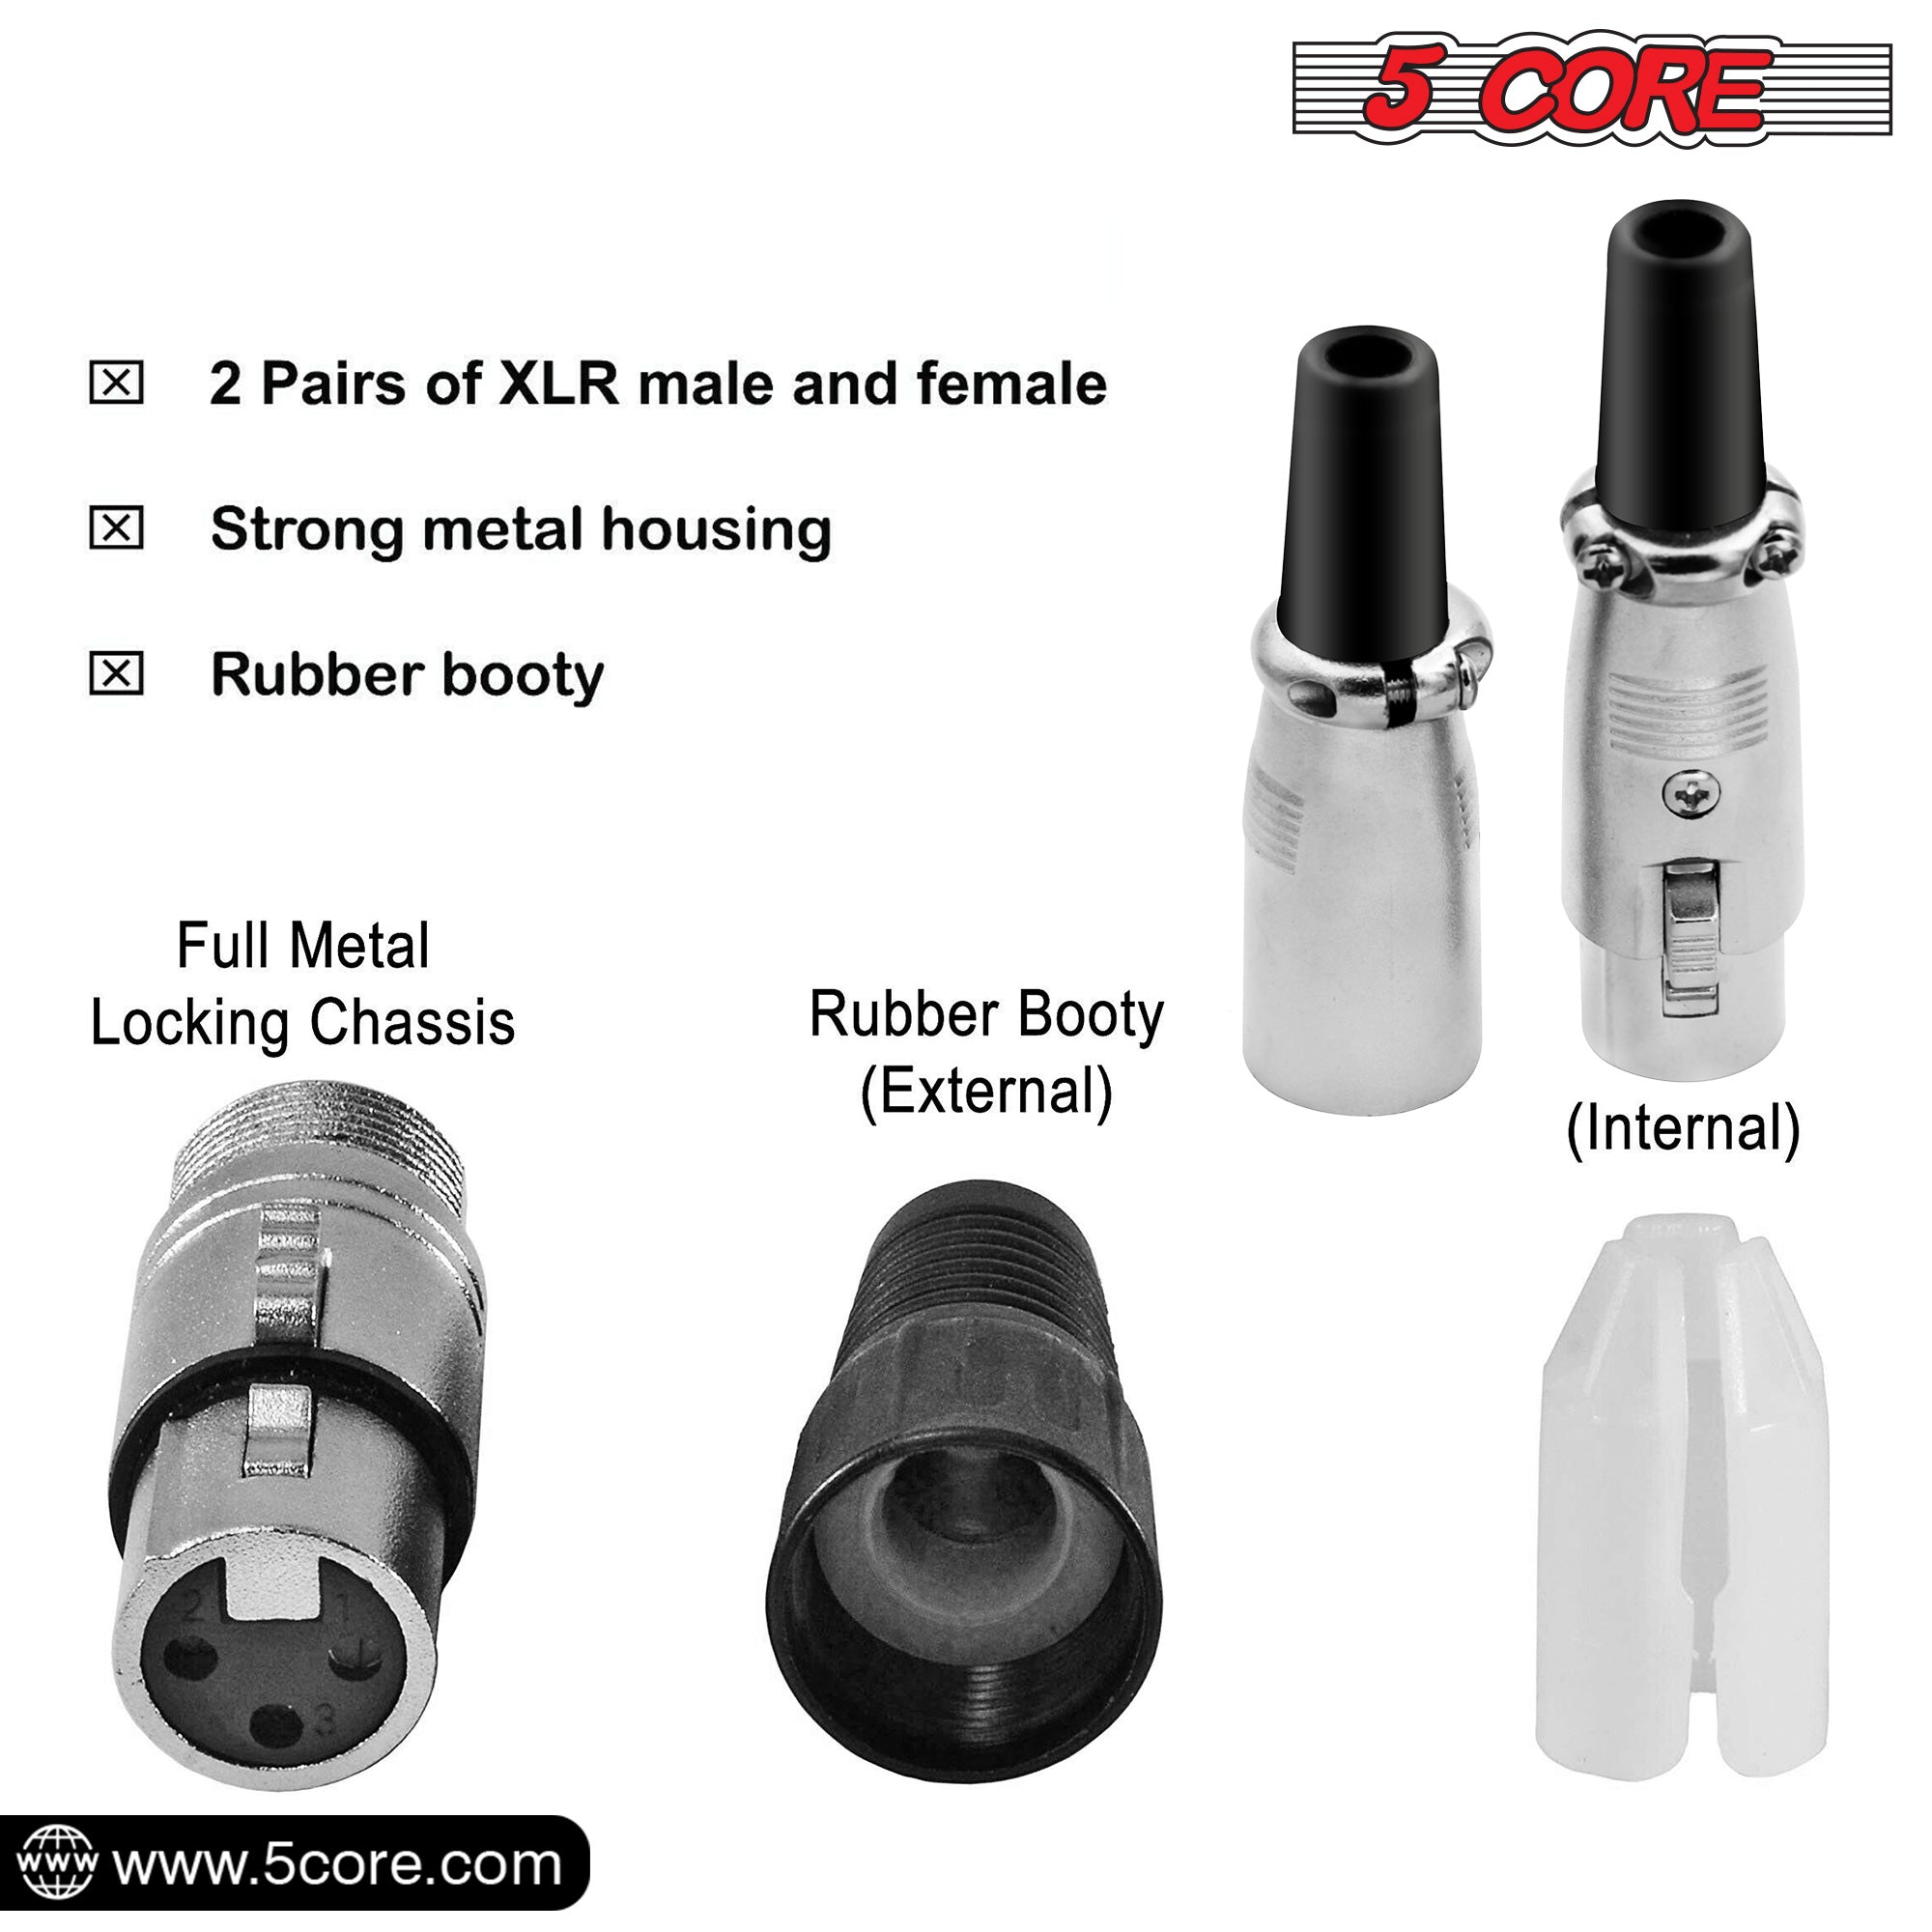 5 Core XLR 3 Pin Female to XLR Male 10Pack • Connector Microphone Line Plug Adapter • w Lock Button